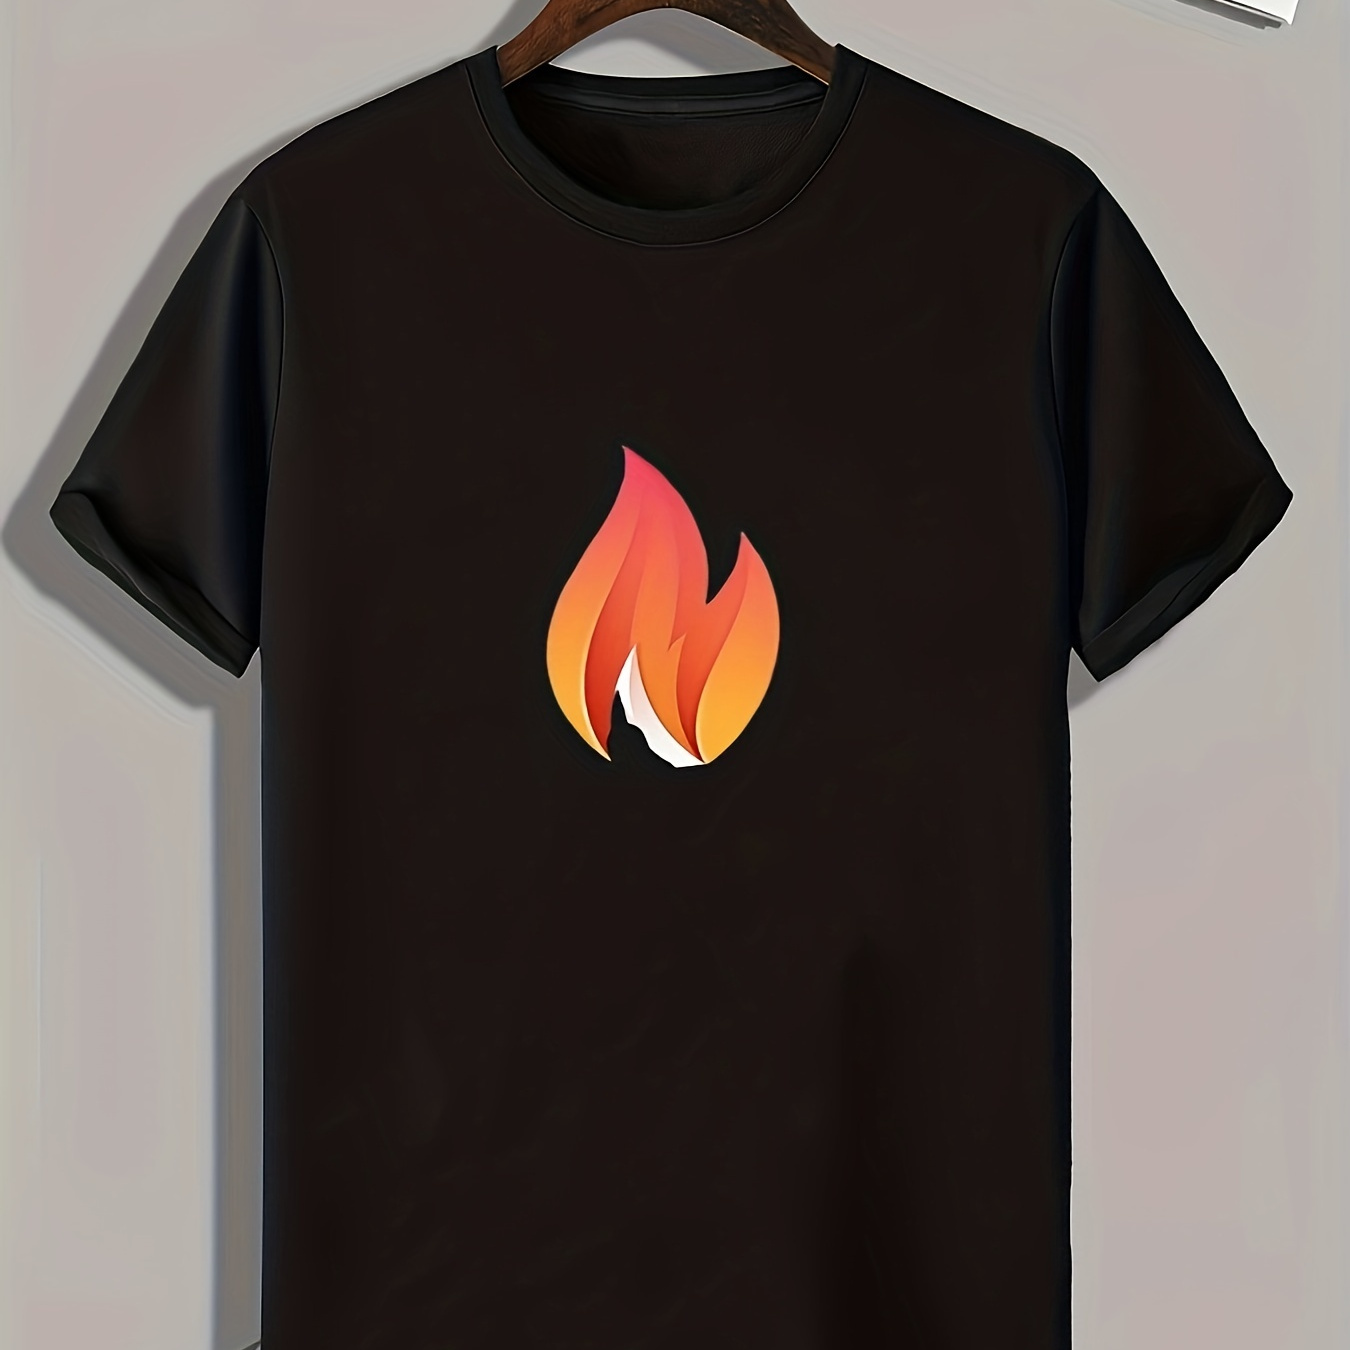 

Flame Print, Men's Graphic T-shirt, Casual Comfy Tees For Summer, Mens Clothing